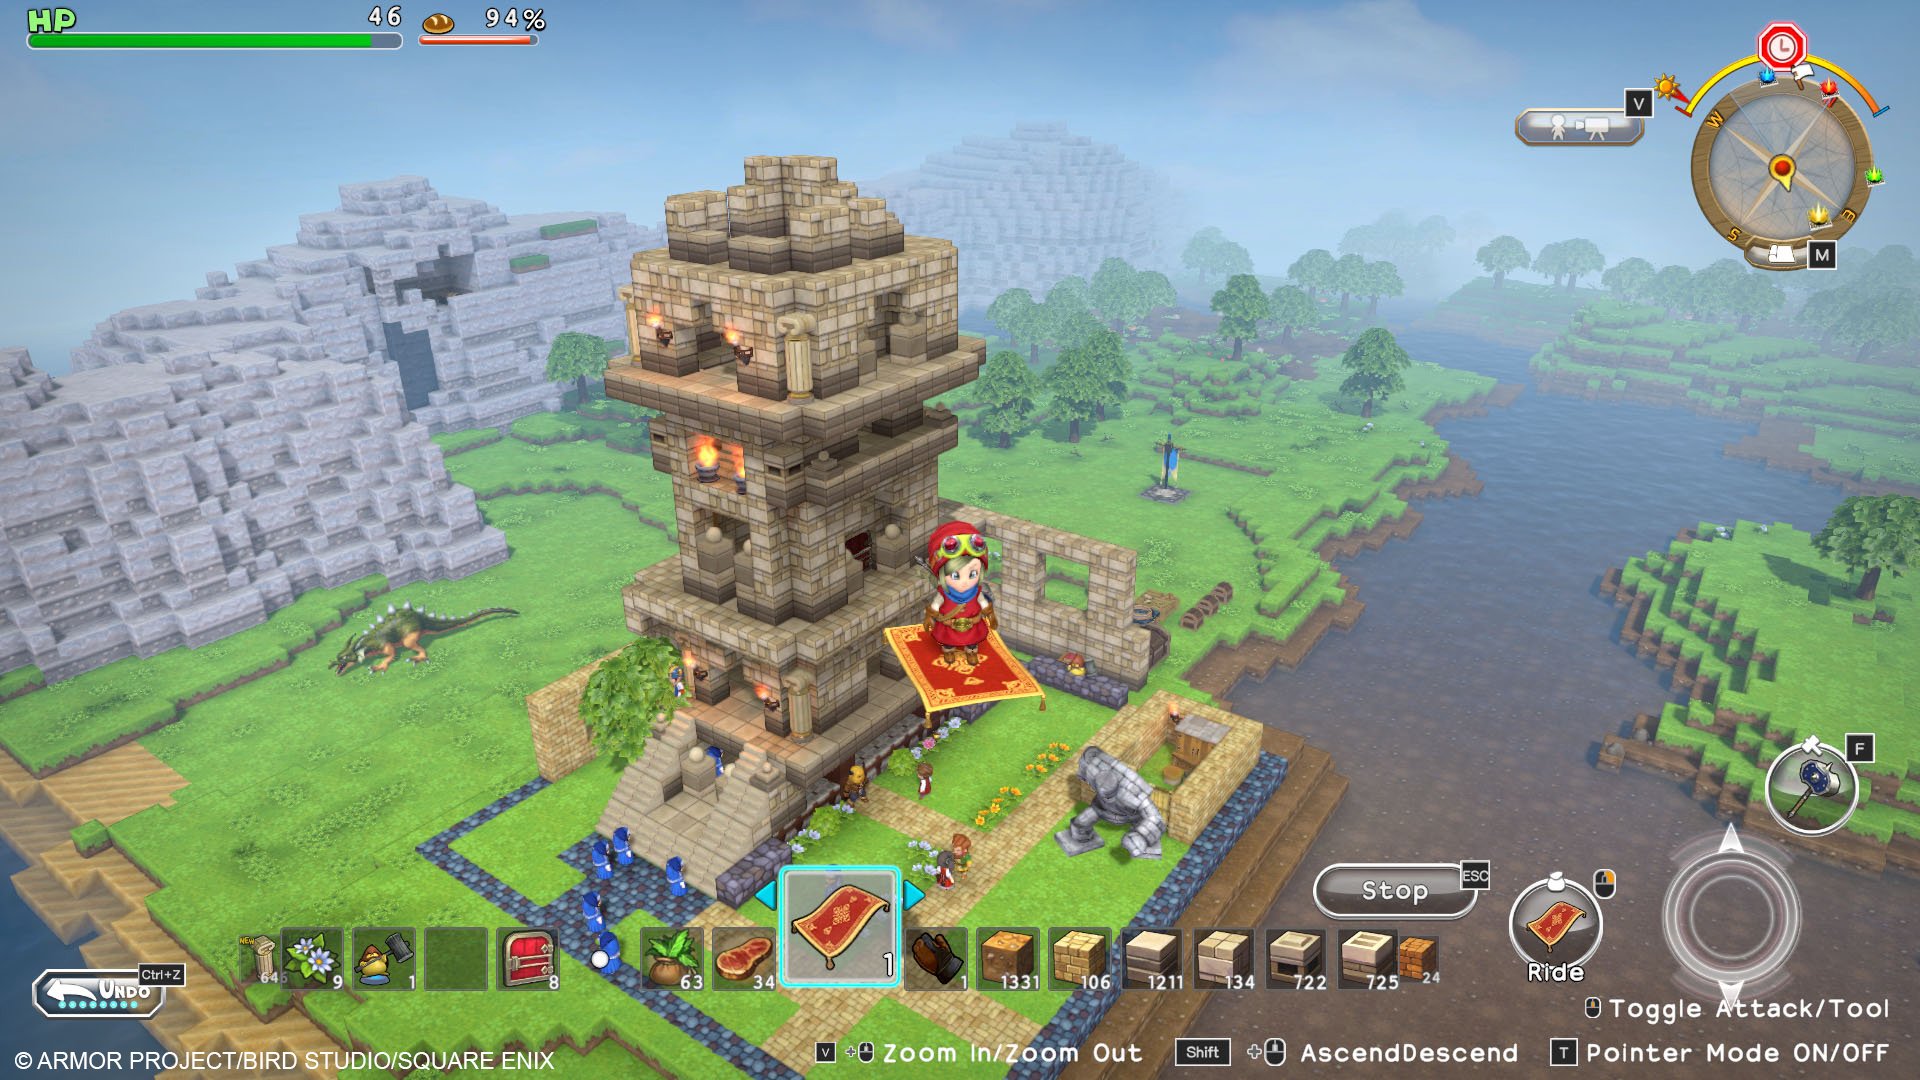 Dragon Quest Builders Launches February 13th for PC